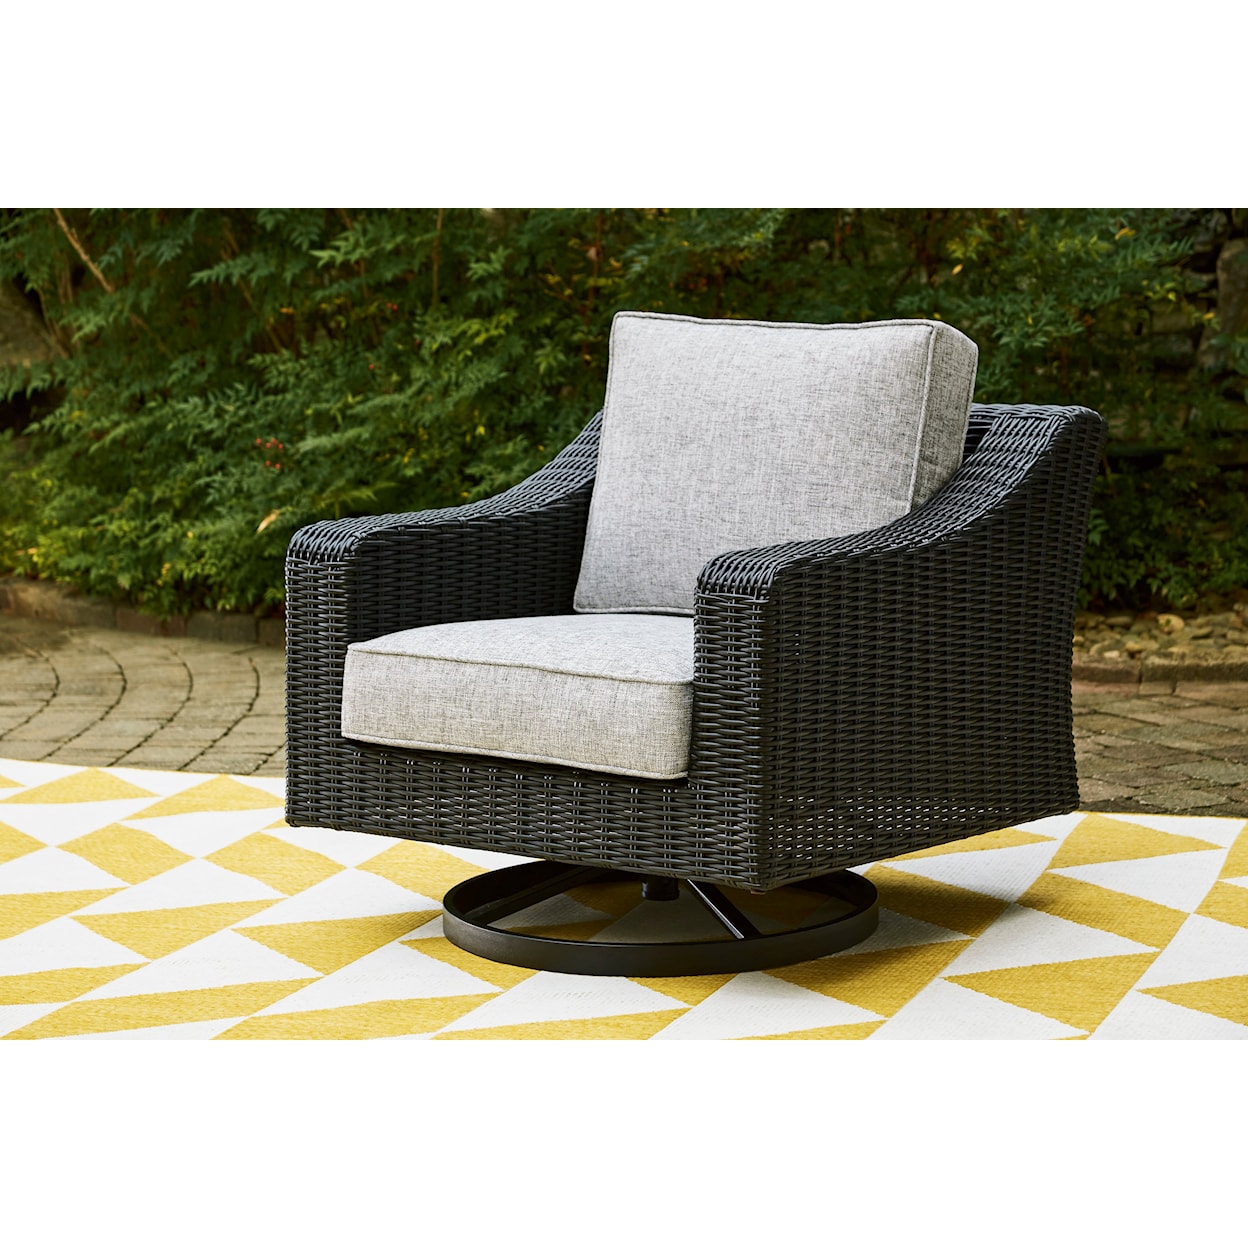 Signature Beachcroft Outdoor Swivel Lounge With Cushion